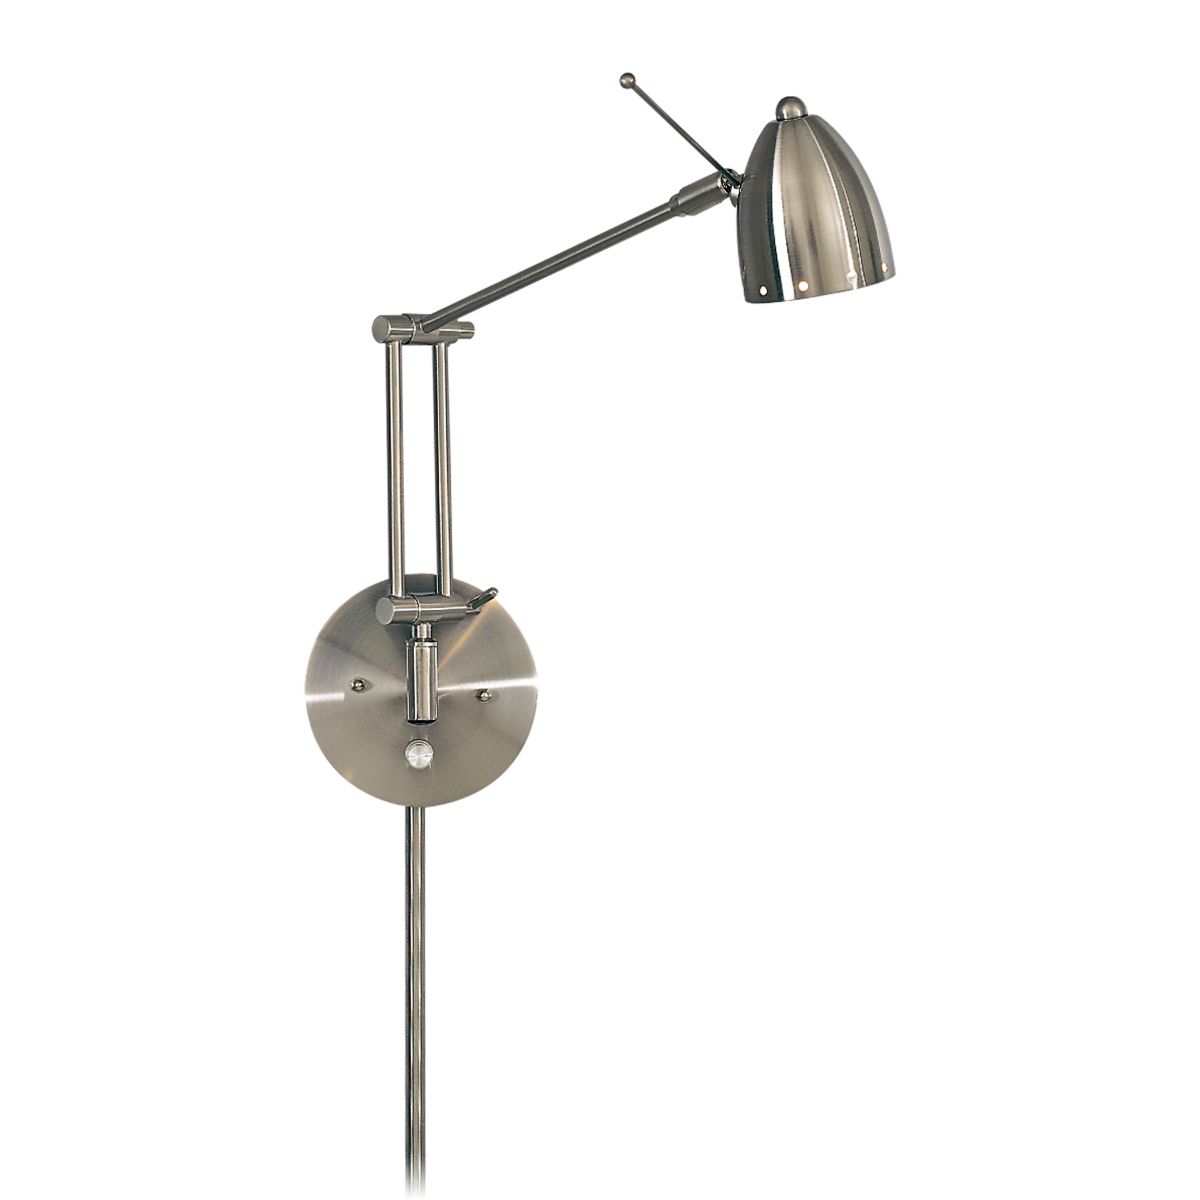 George's Reading Room Contemporary LED Wall Lamp Silver finish